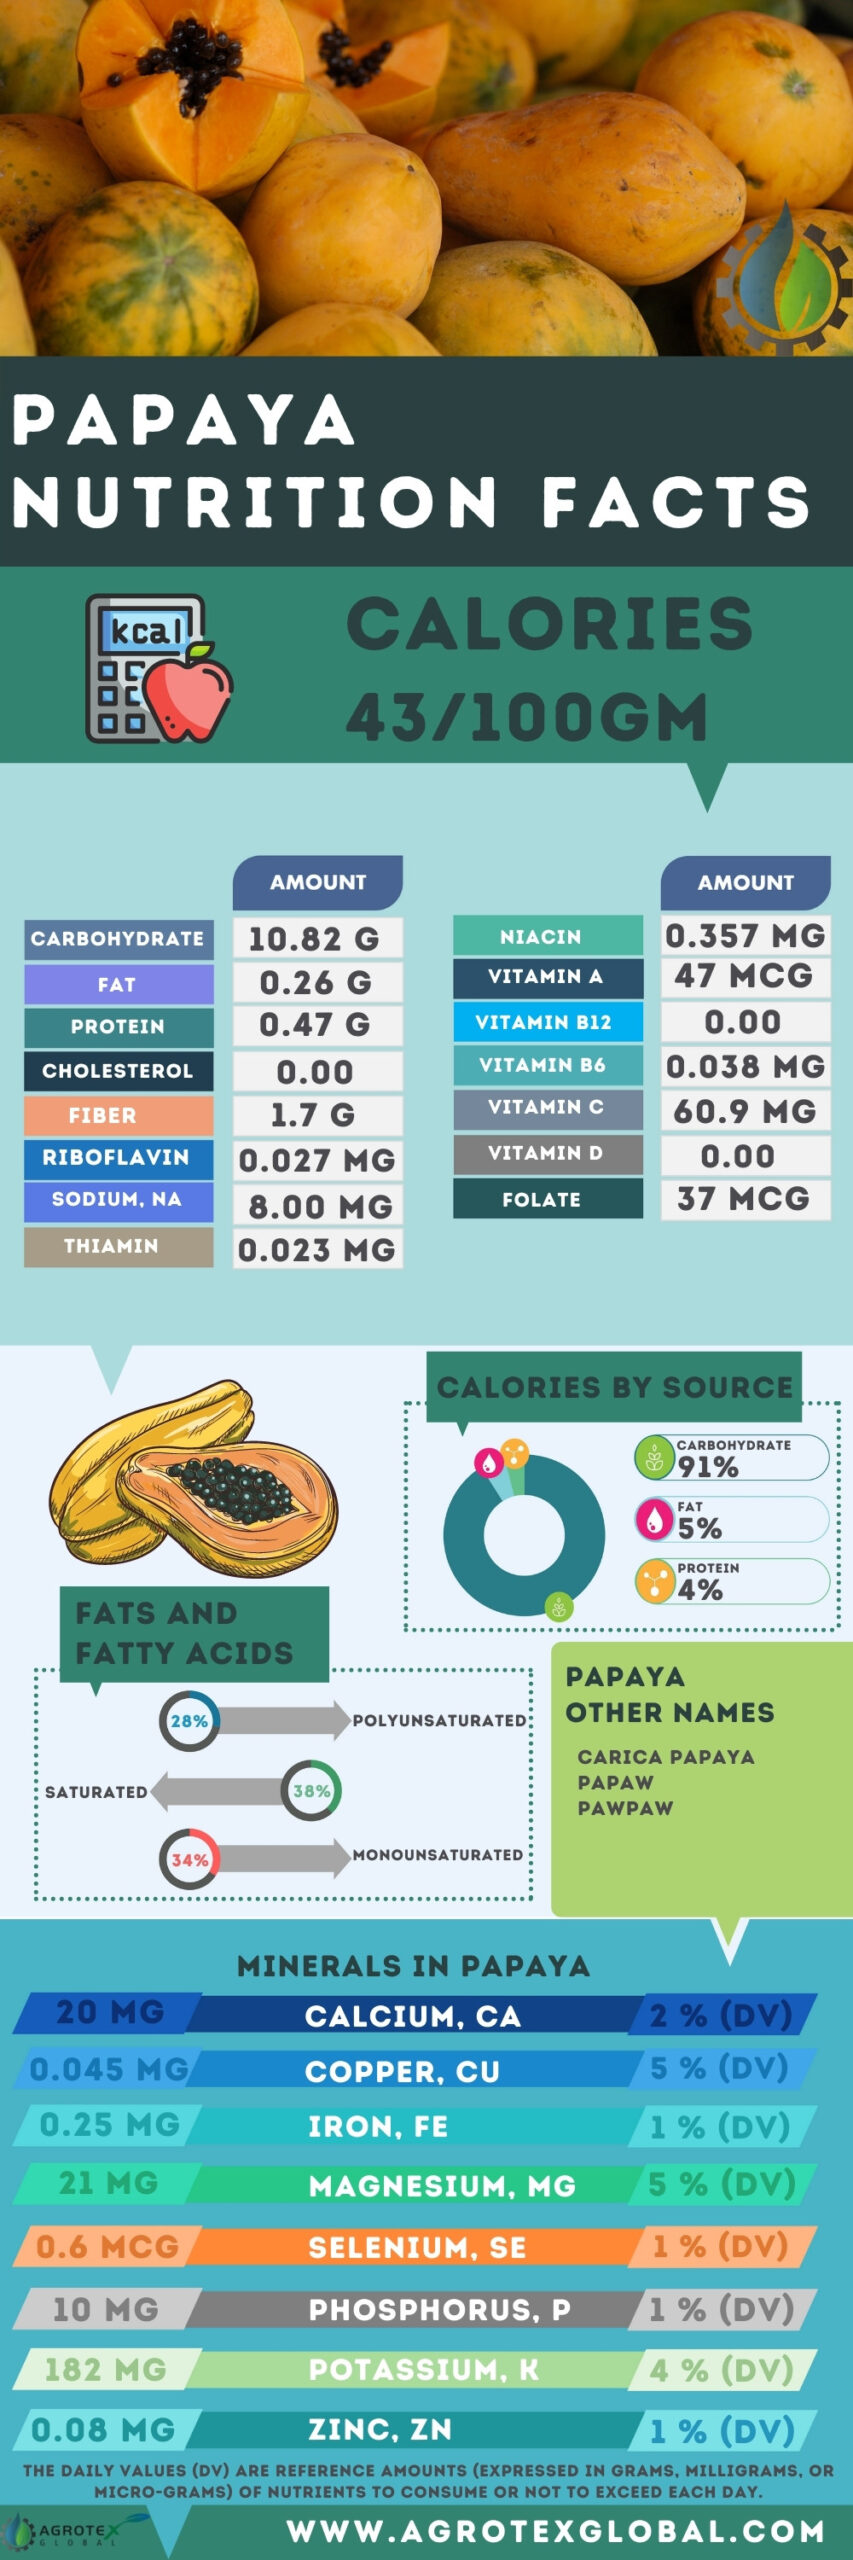 Papaya NUTRITION FACTS calorie chart infographic